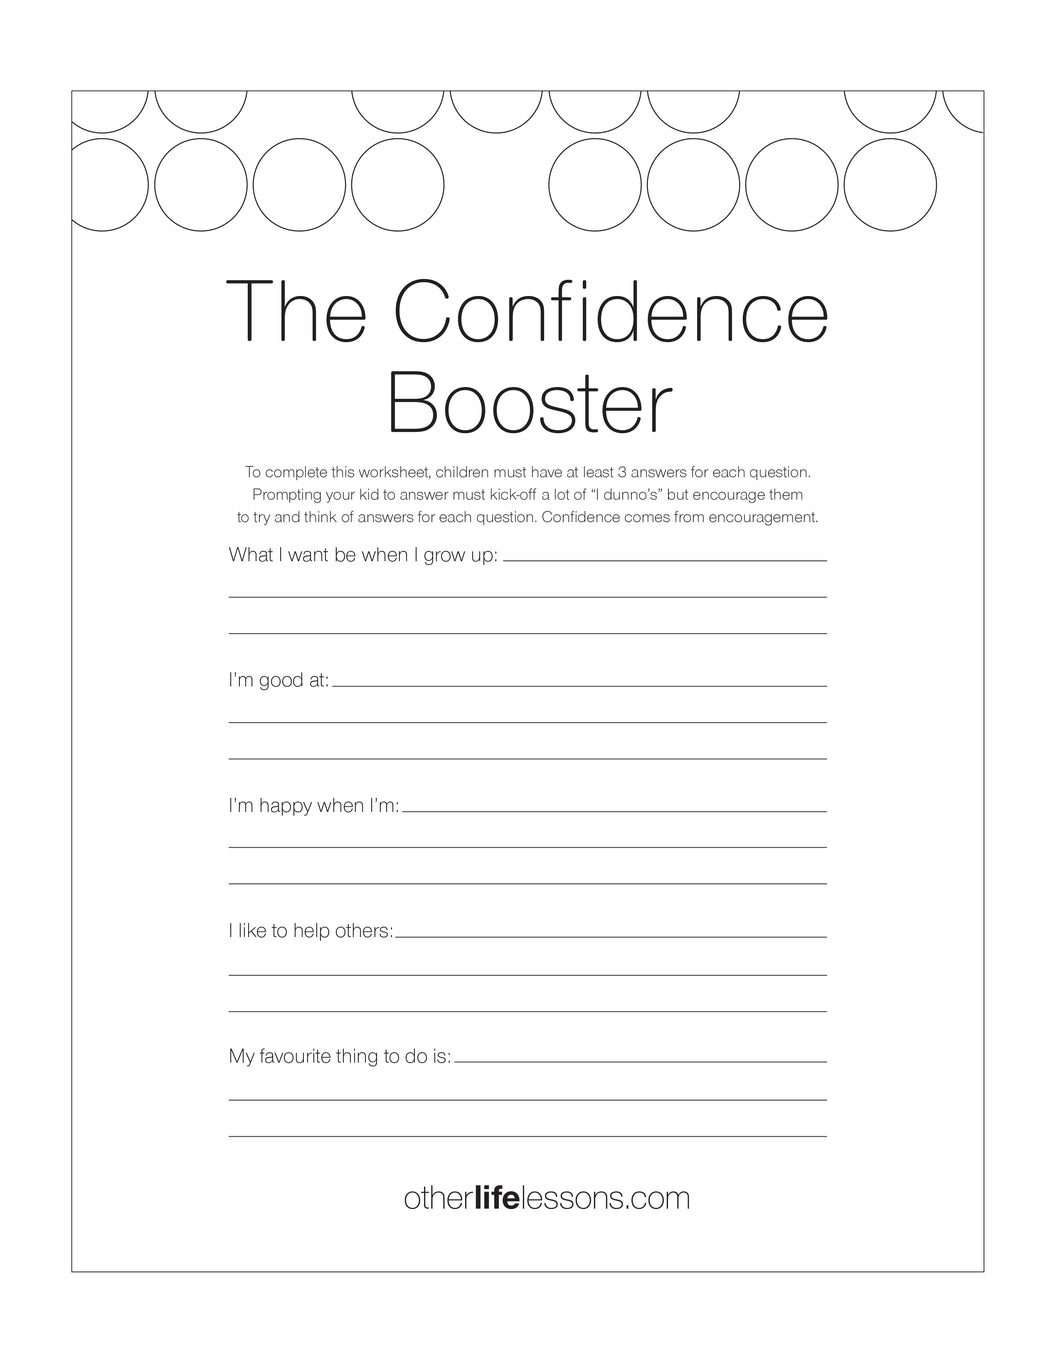 The Confidence Booster (Free Printable)